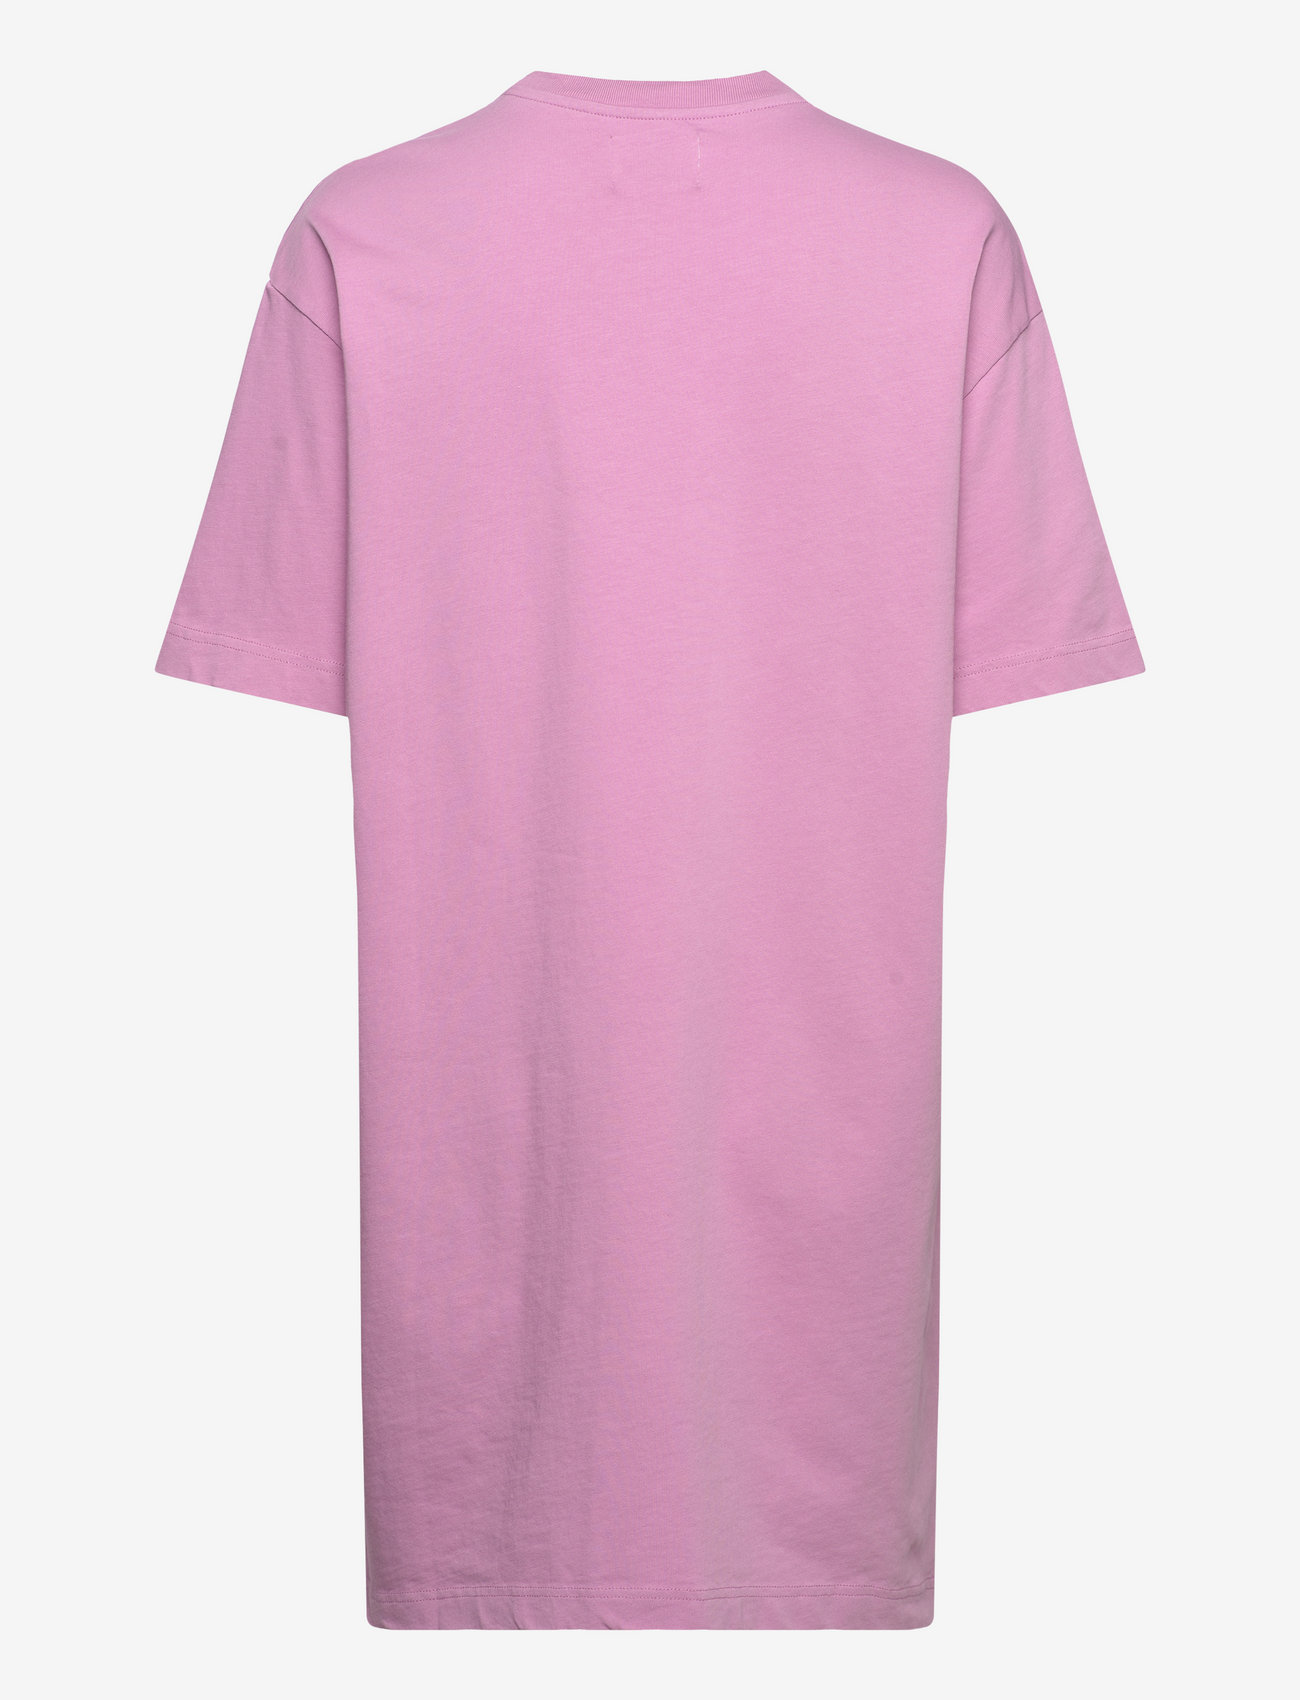 Double A by Wood Wood - Ulla AA dress - t-shirt dresses - rosy lavender - 1